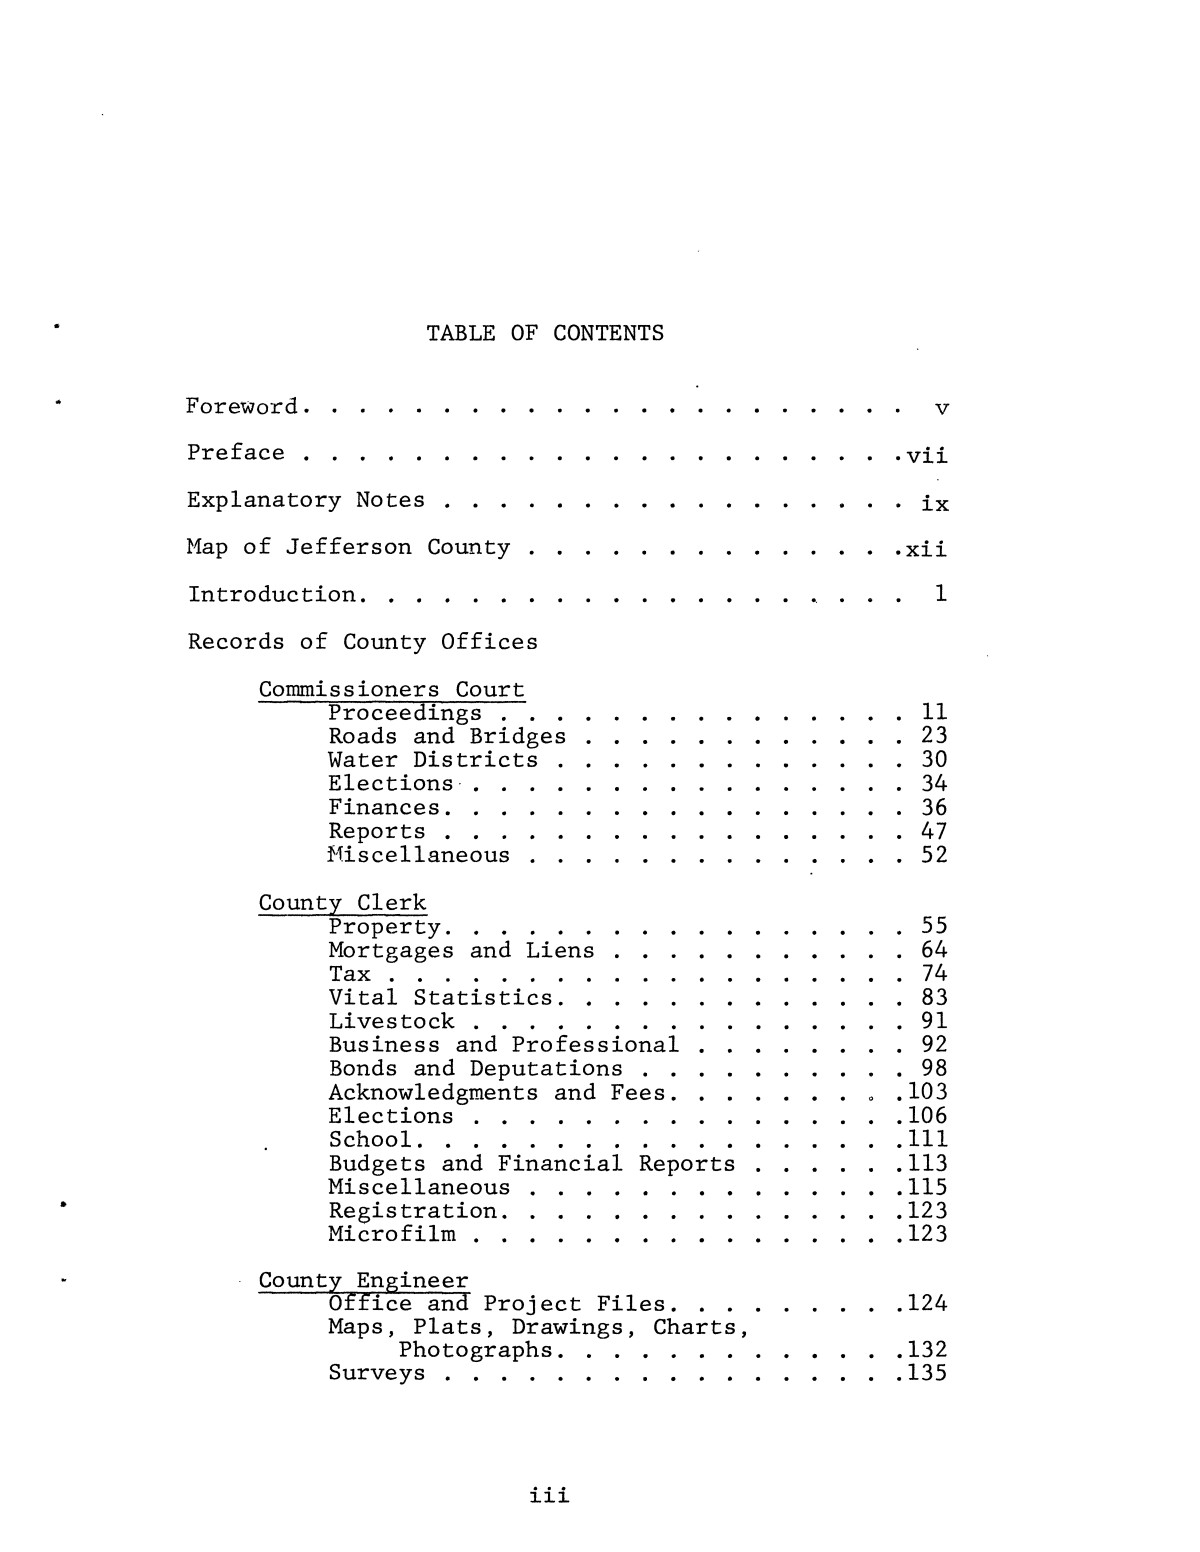 Inventory of county records, Jefferson County Courthouse, Beaumont, Texas, Volume 1
                                                
                                                    III
                                                